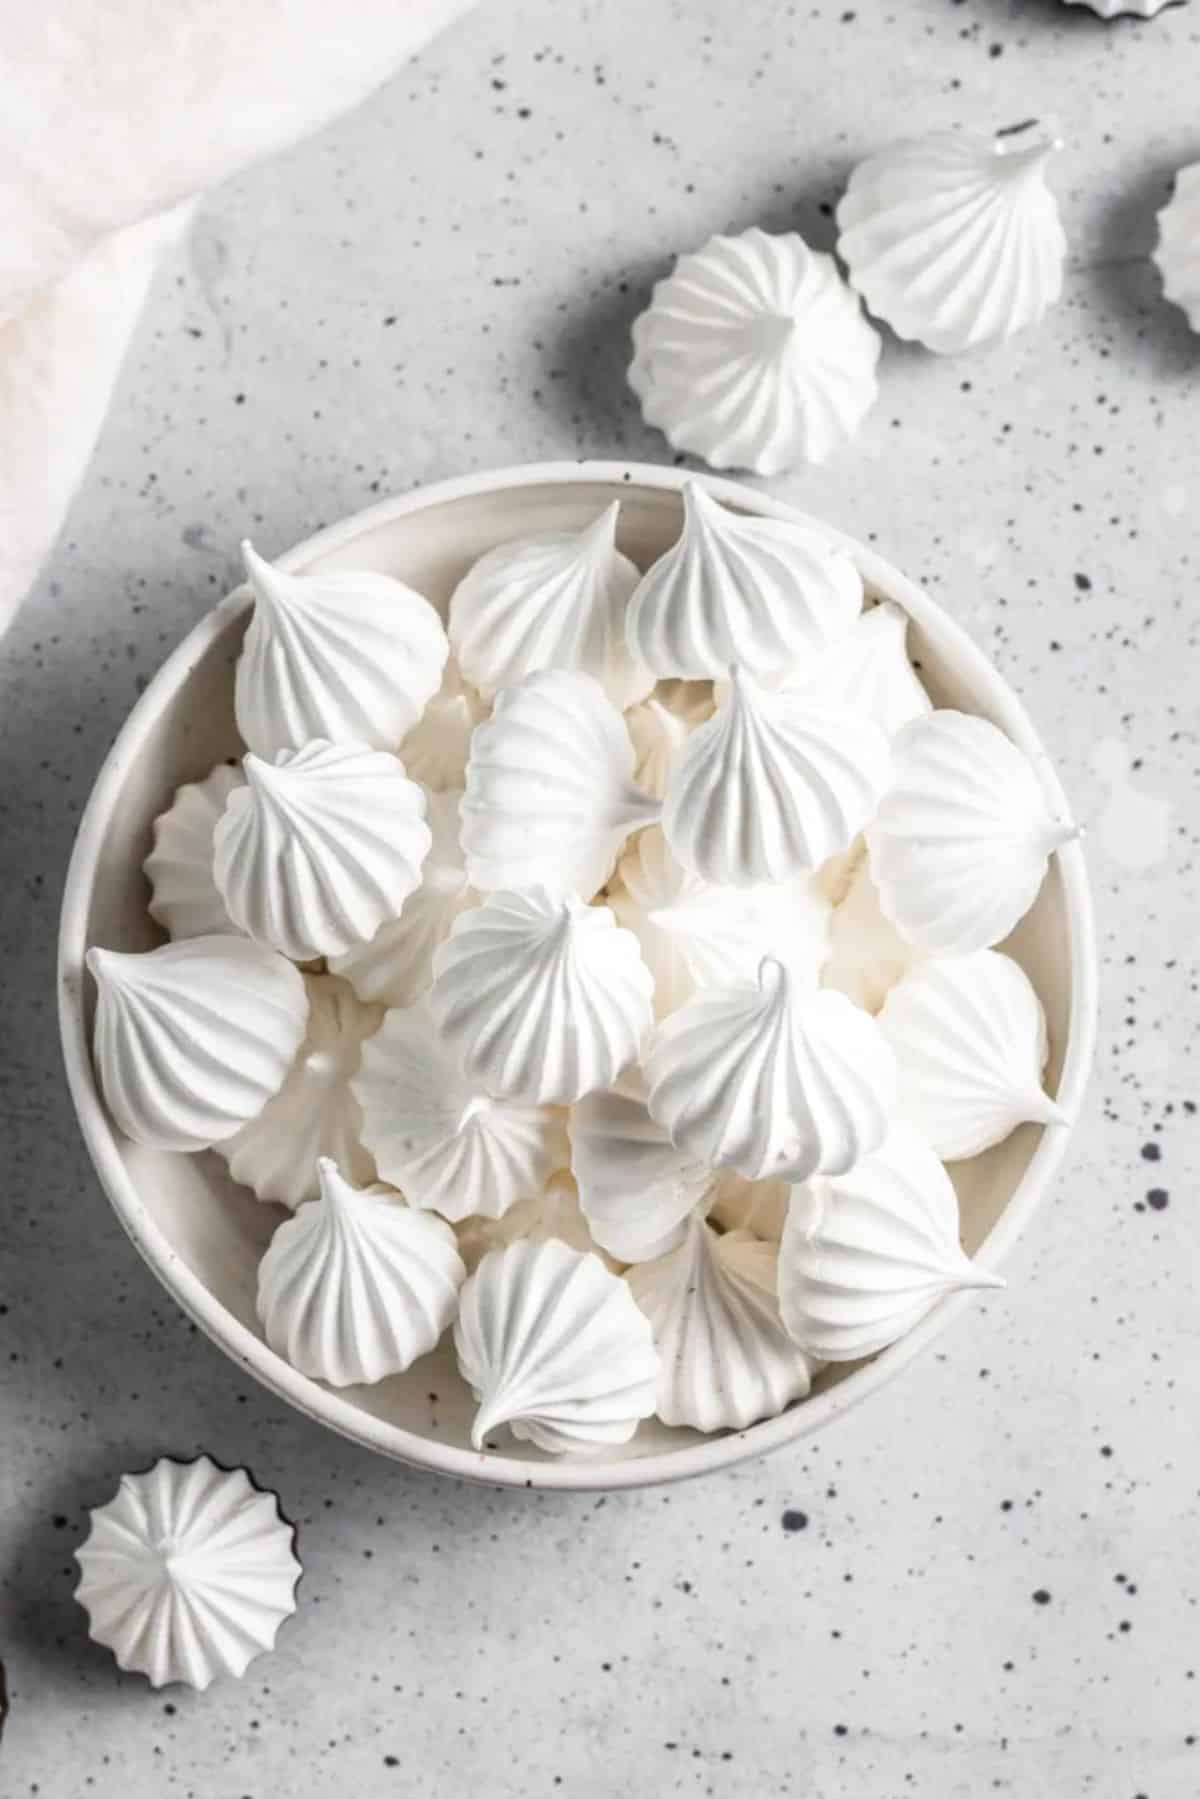 French Meringue Cookies in a white bowl.